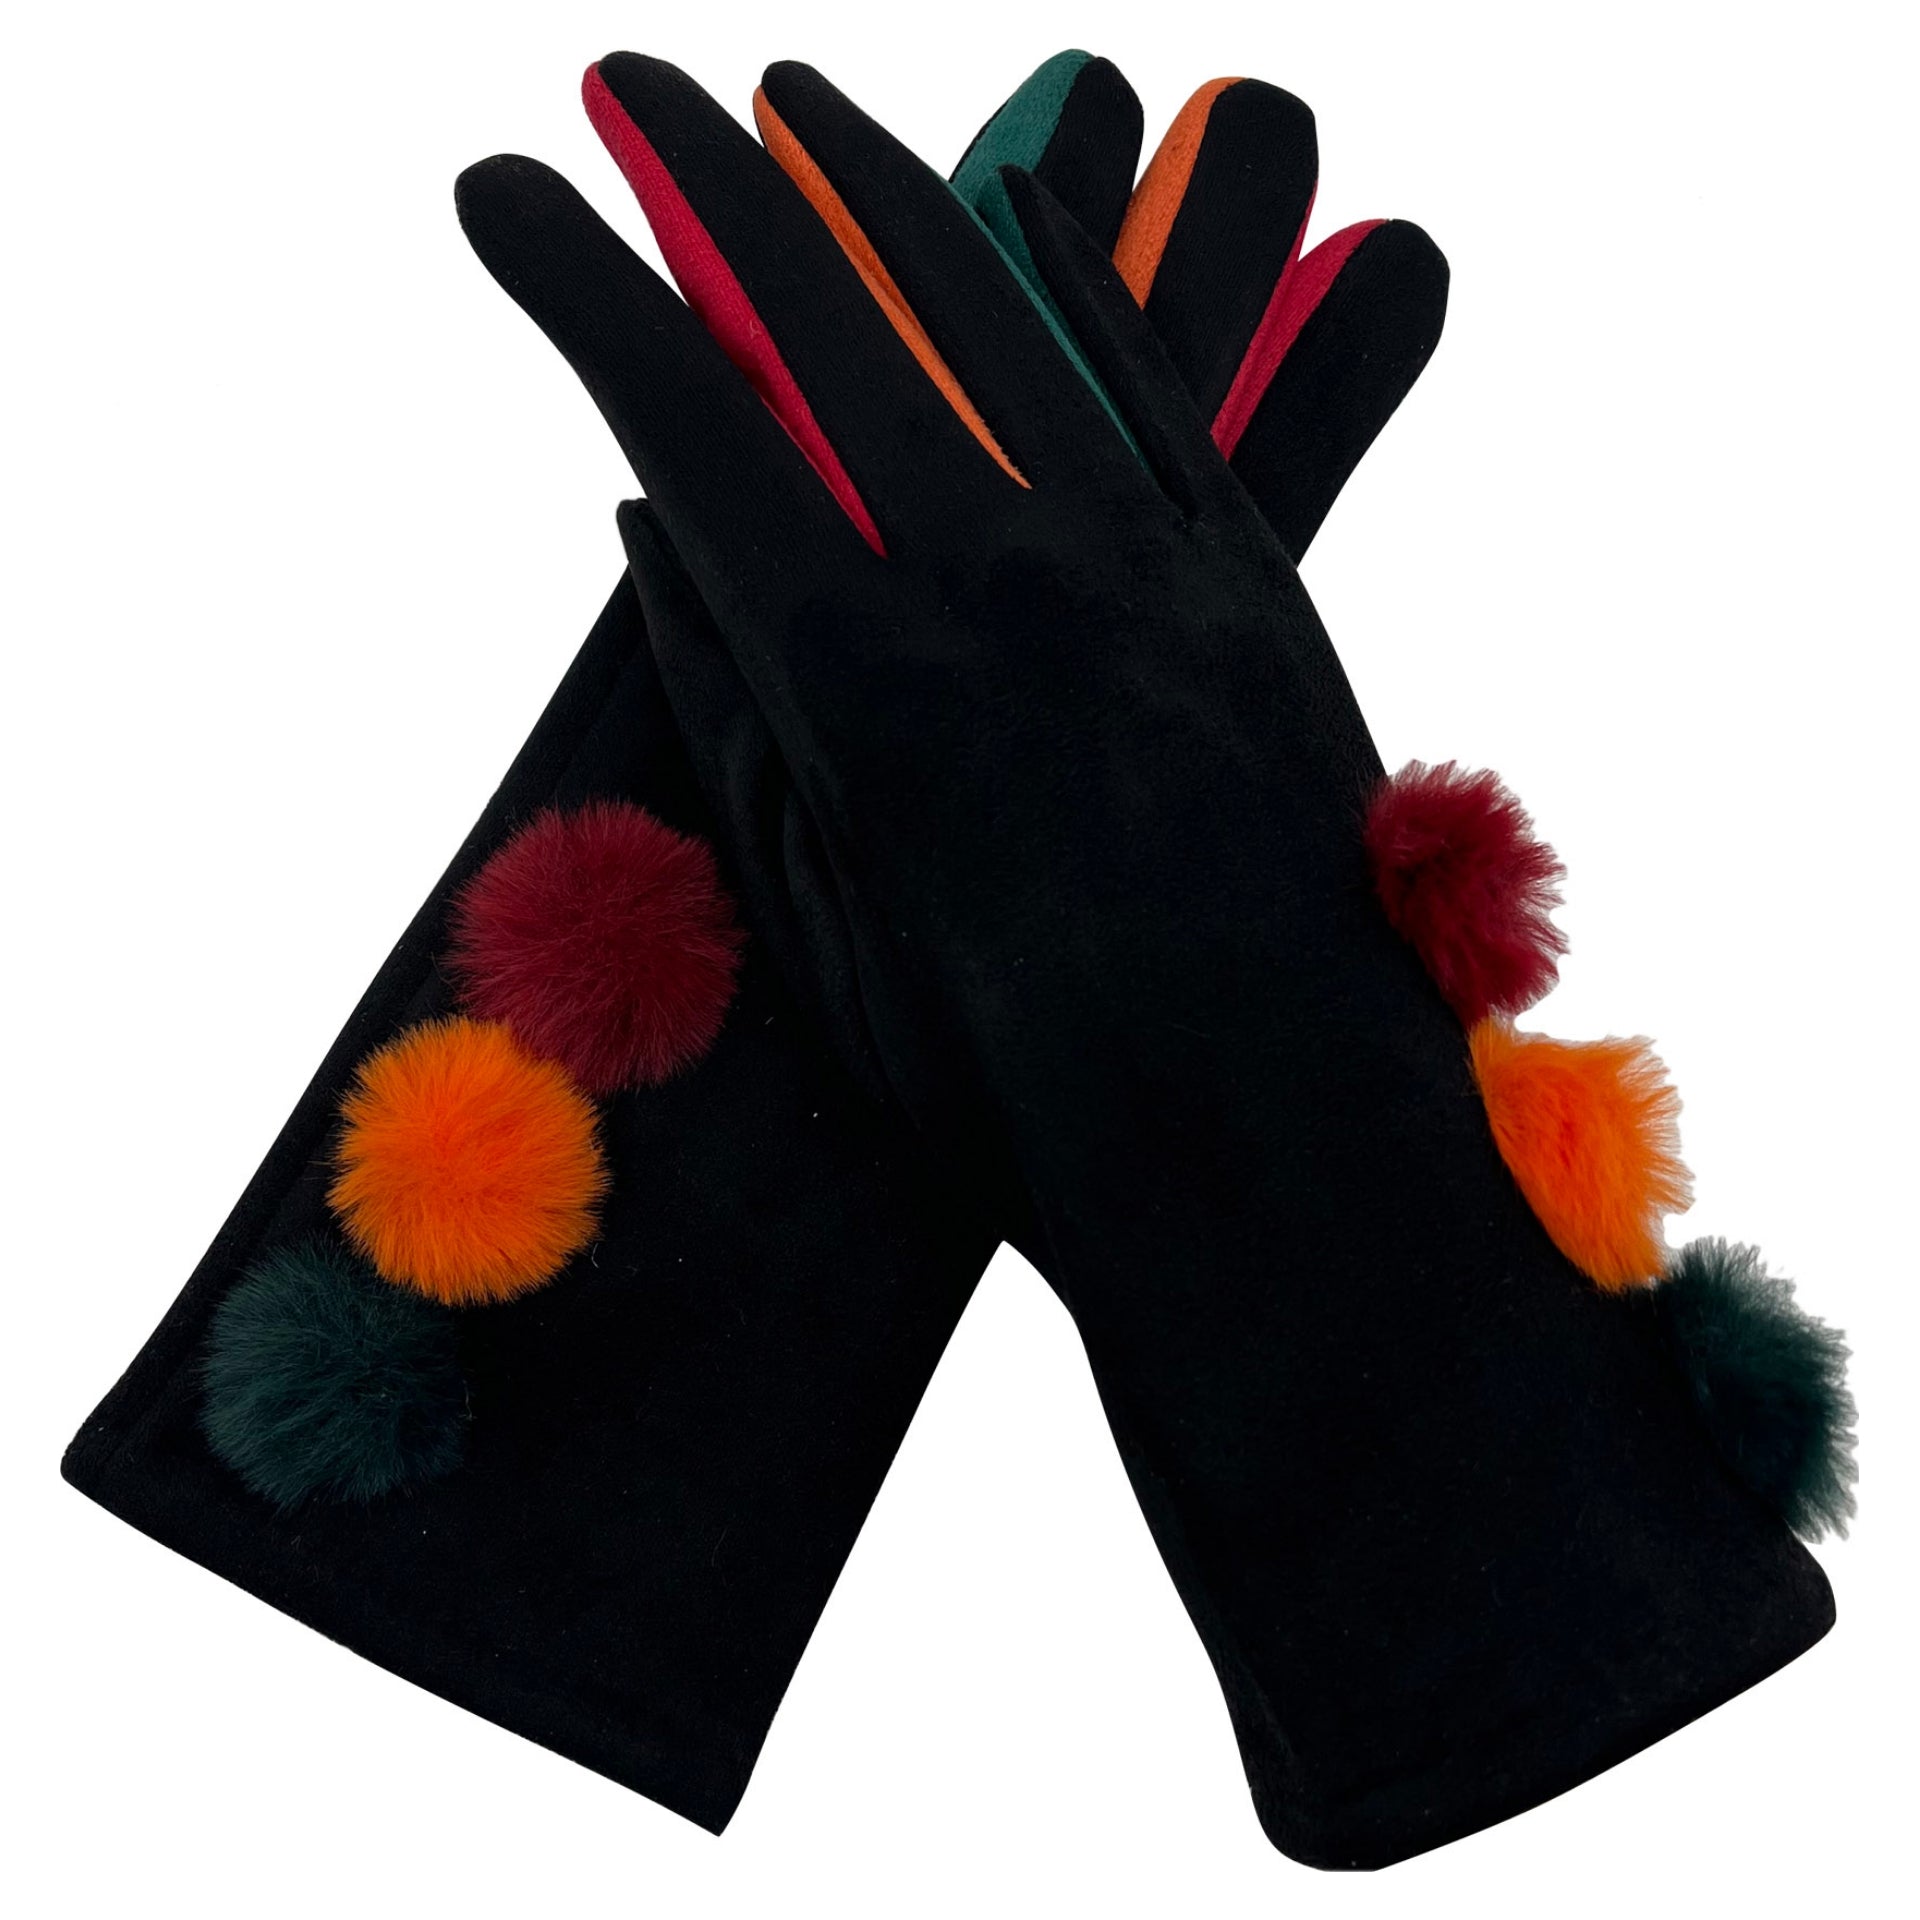 Ladies Soft Synthetic Leather Gloves Walking Driving Winter Warm Fur Lined black